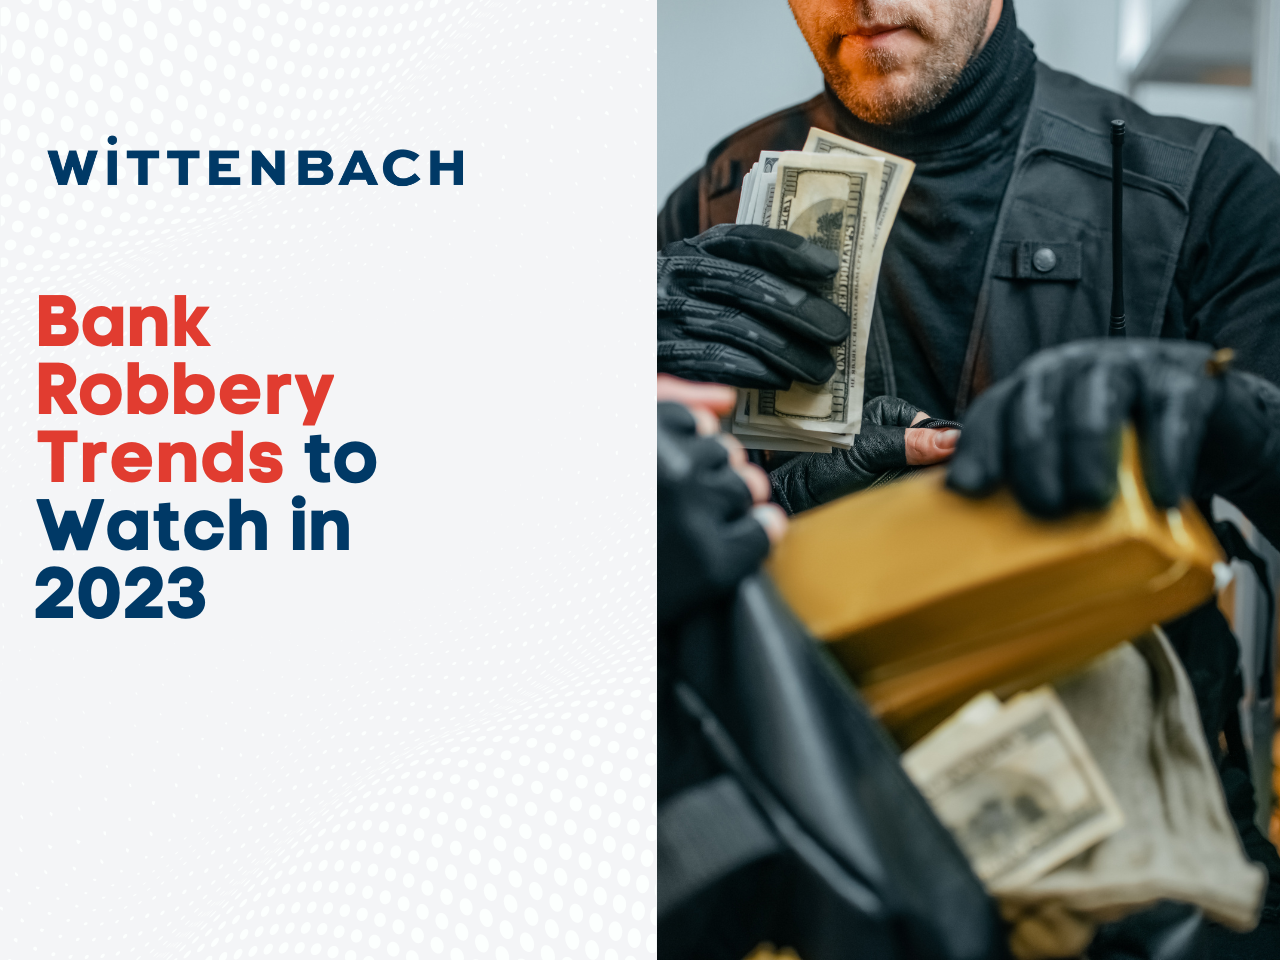 Bank Robbery Trends to Watch in 2023